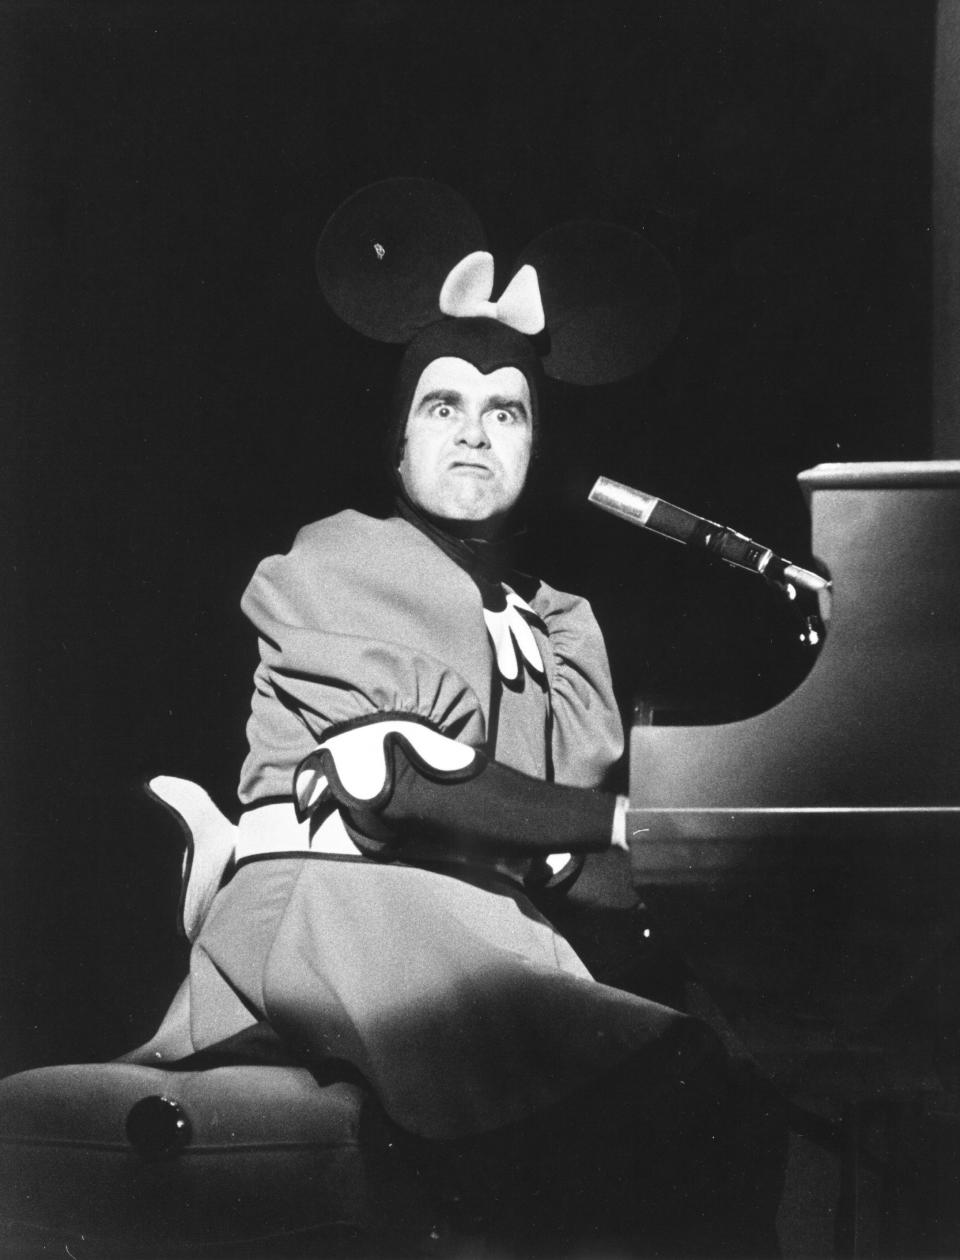 John at The Forum in Inglewood,&nbsp;California, dressed as Minnie Mouse.